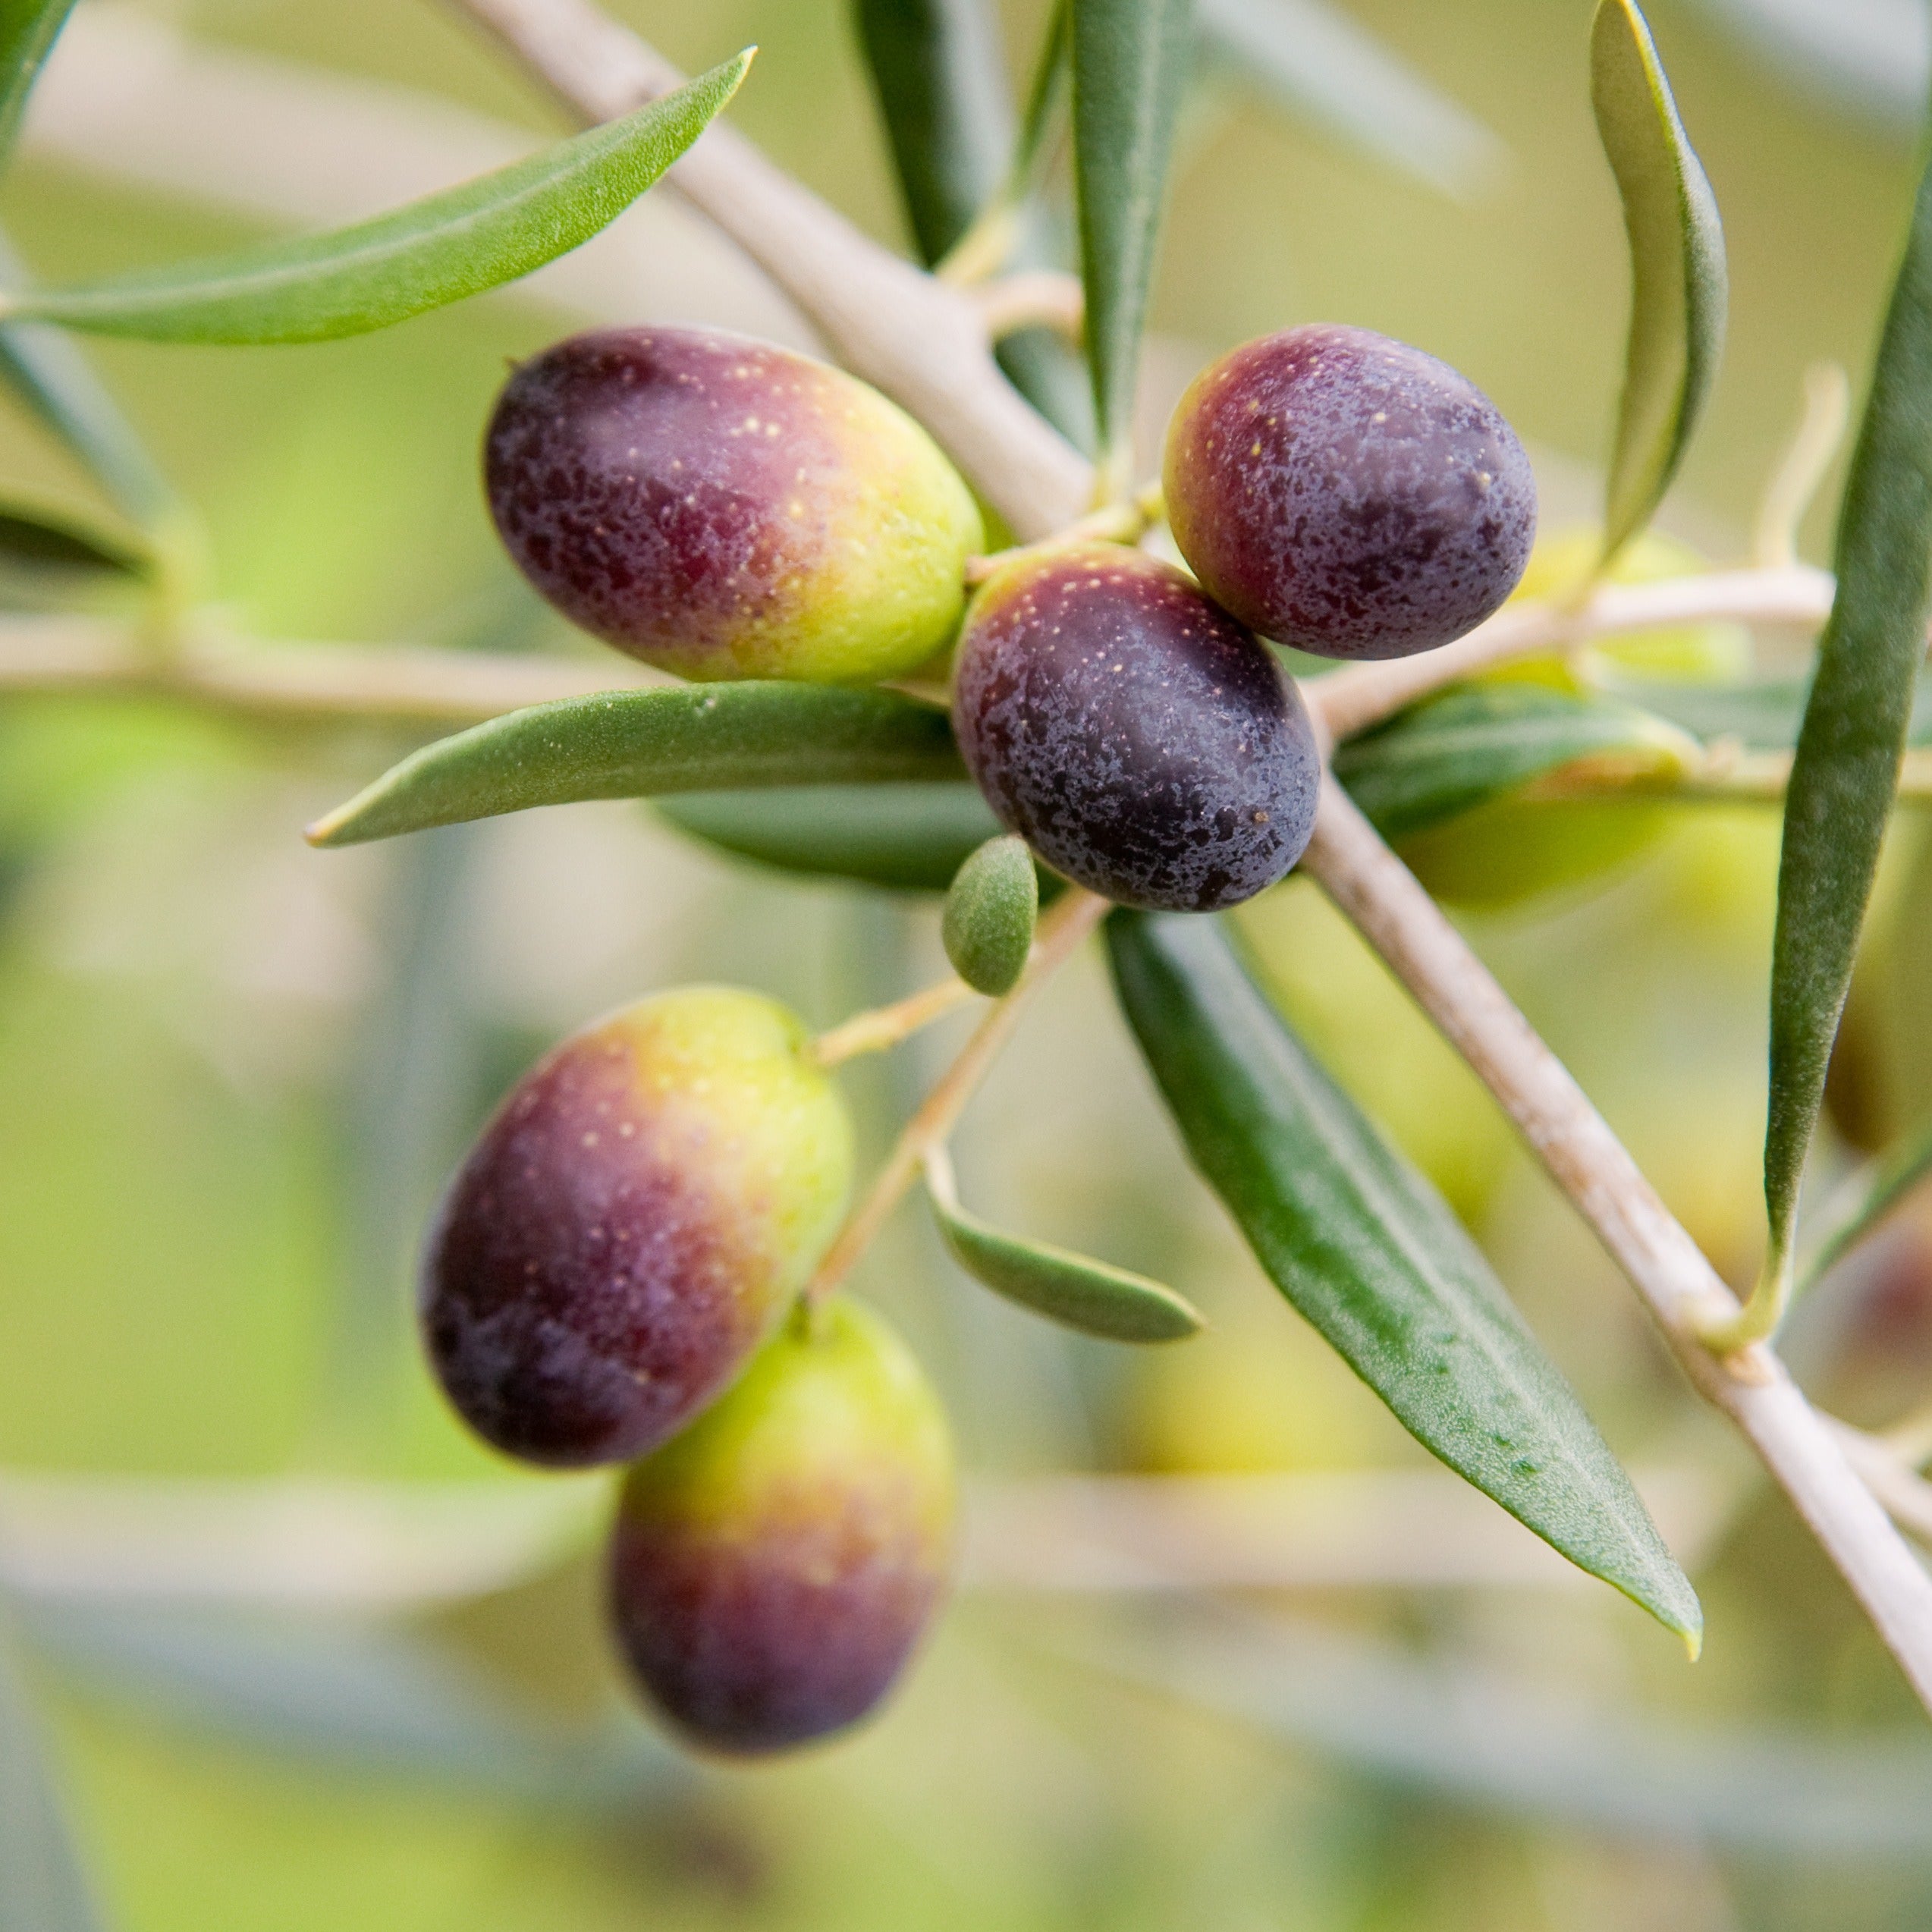 6 Little Known Health Benefits of Eating Olives